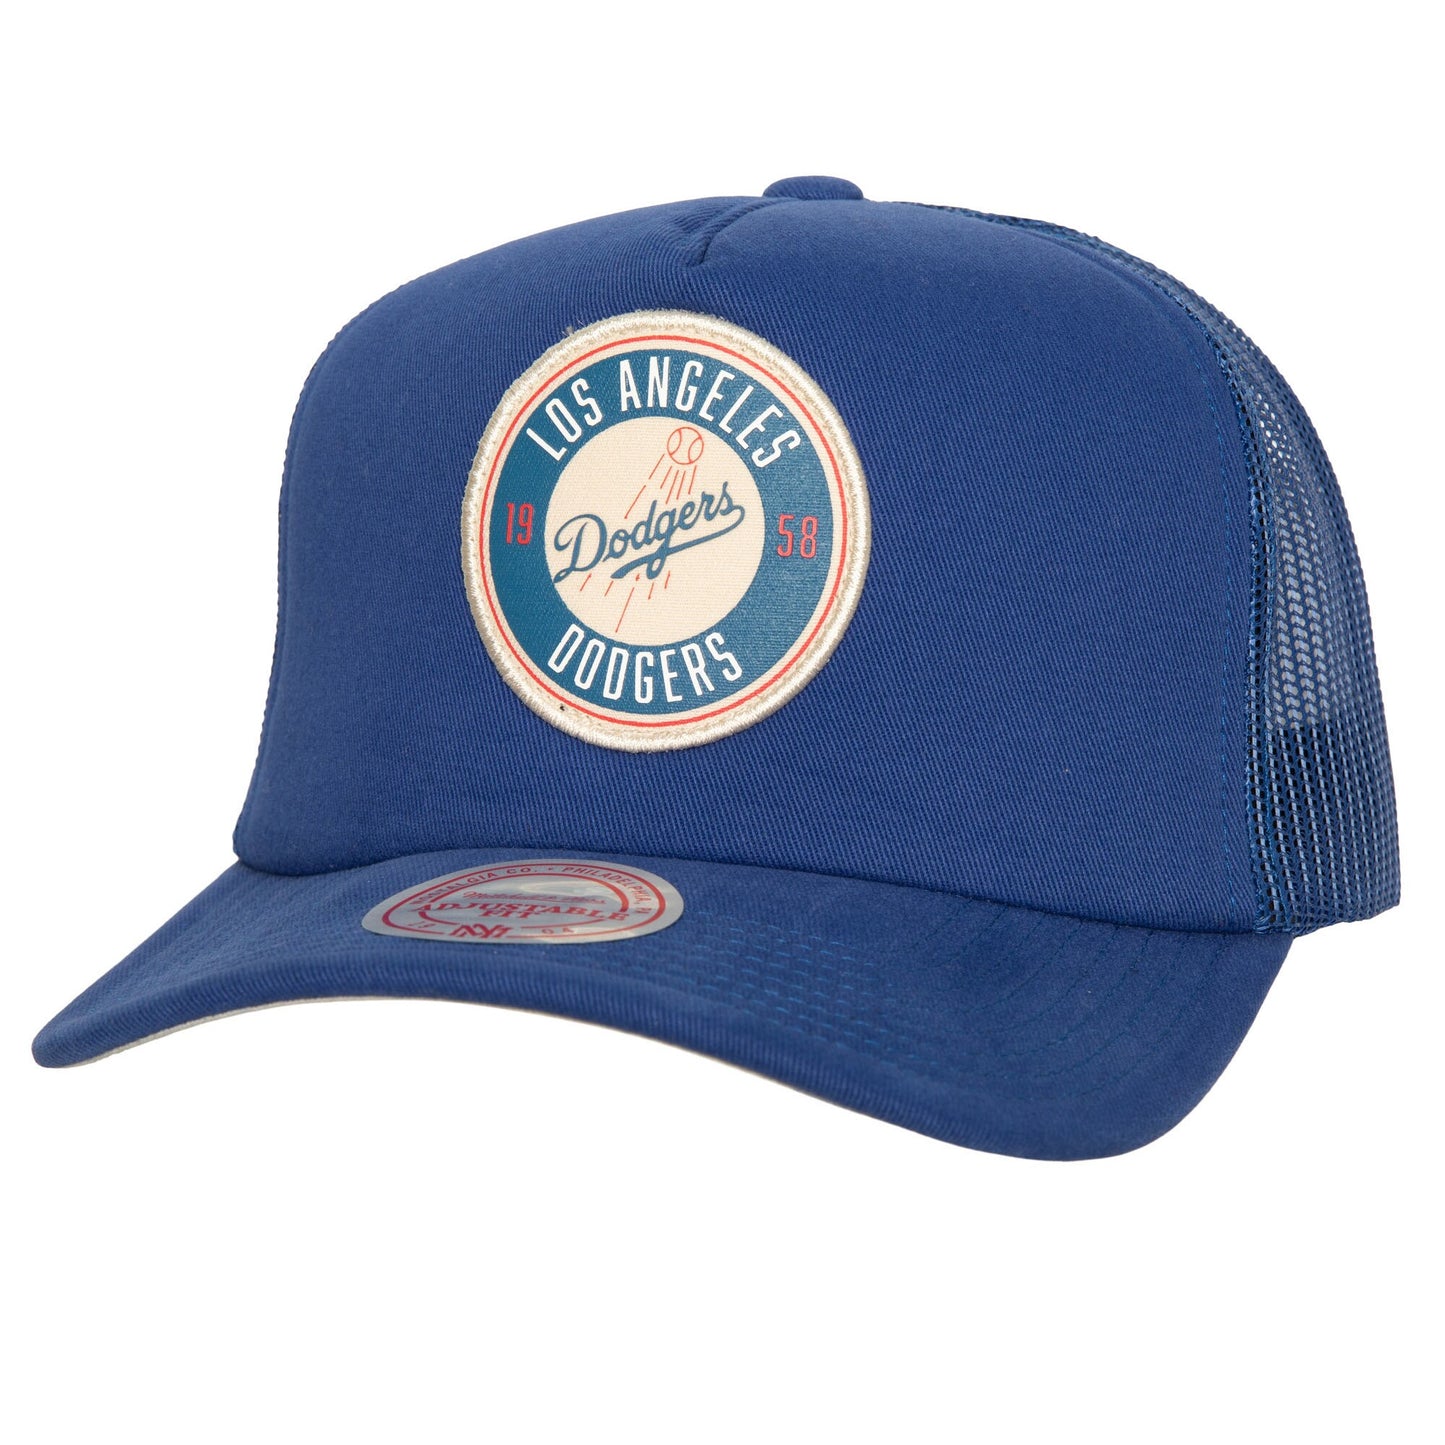 Los Angeles Dodgers Mitchell & Ness Cooperstown Collection Circle Change Trucker Adjustable Hat - Royal